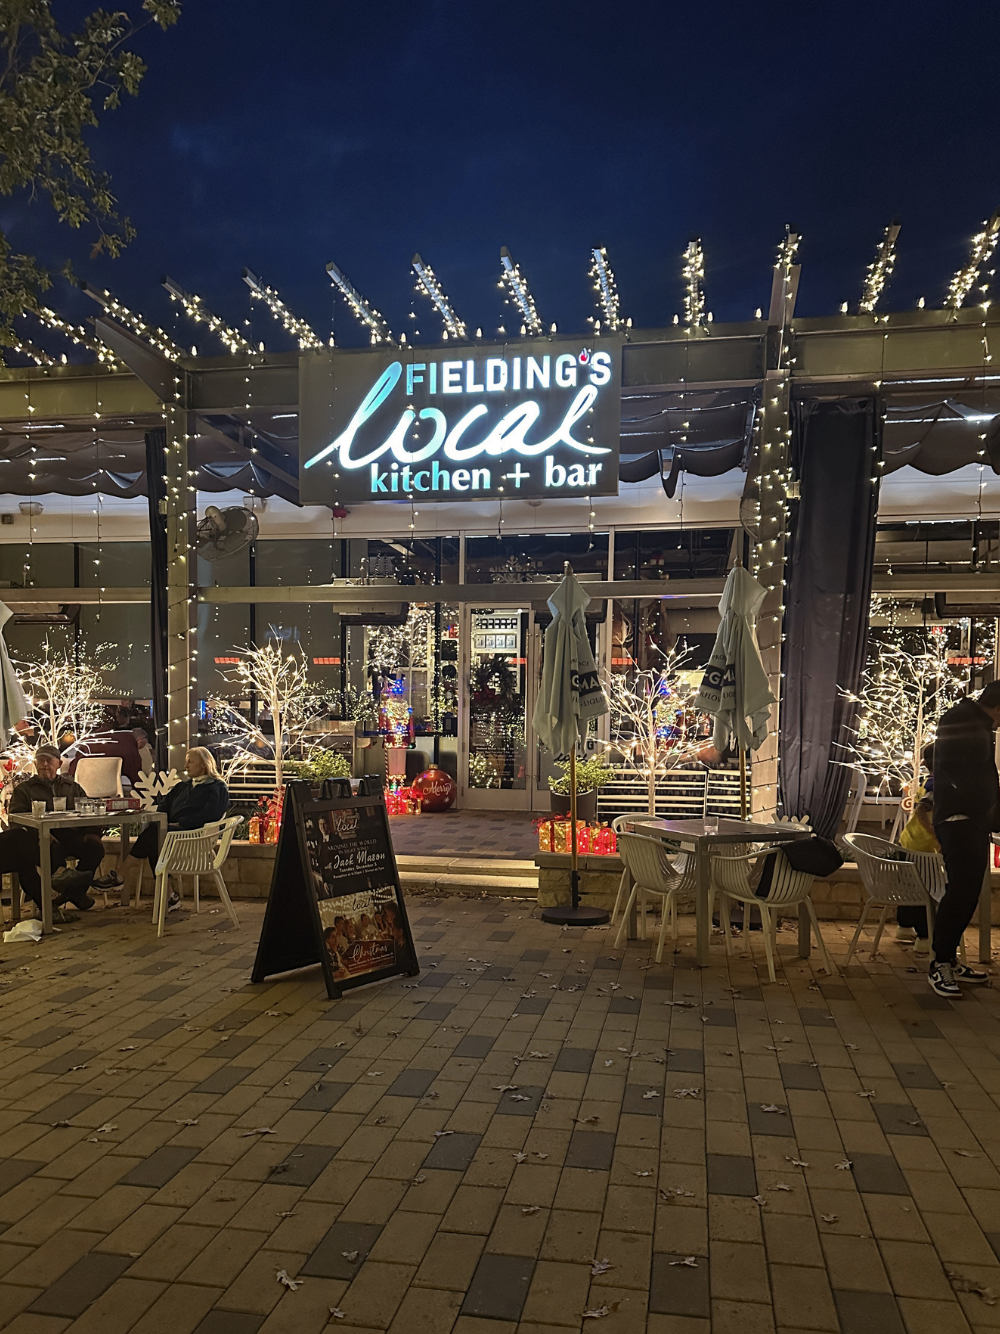 fielding's local kitchen and bar exterior the woodlands tx